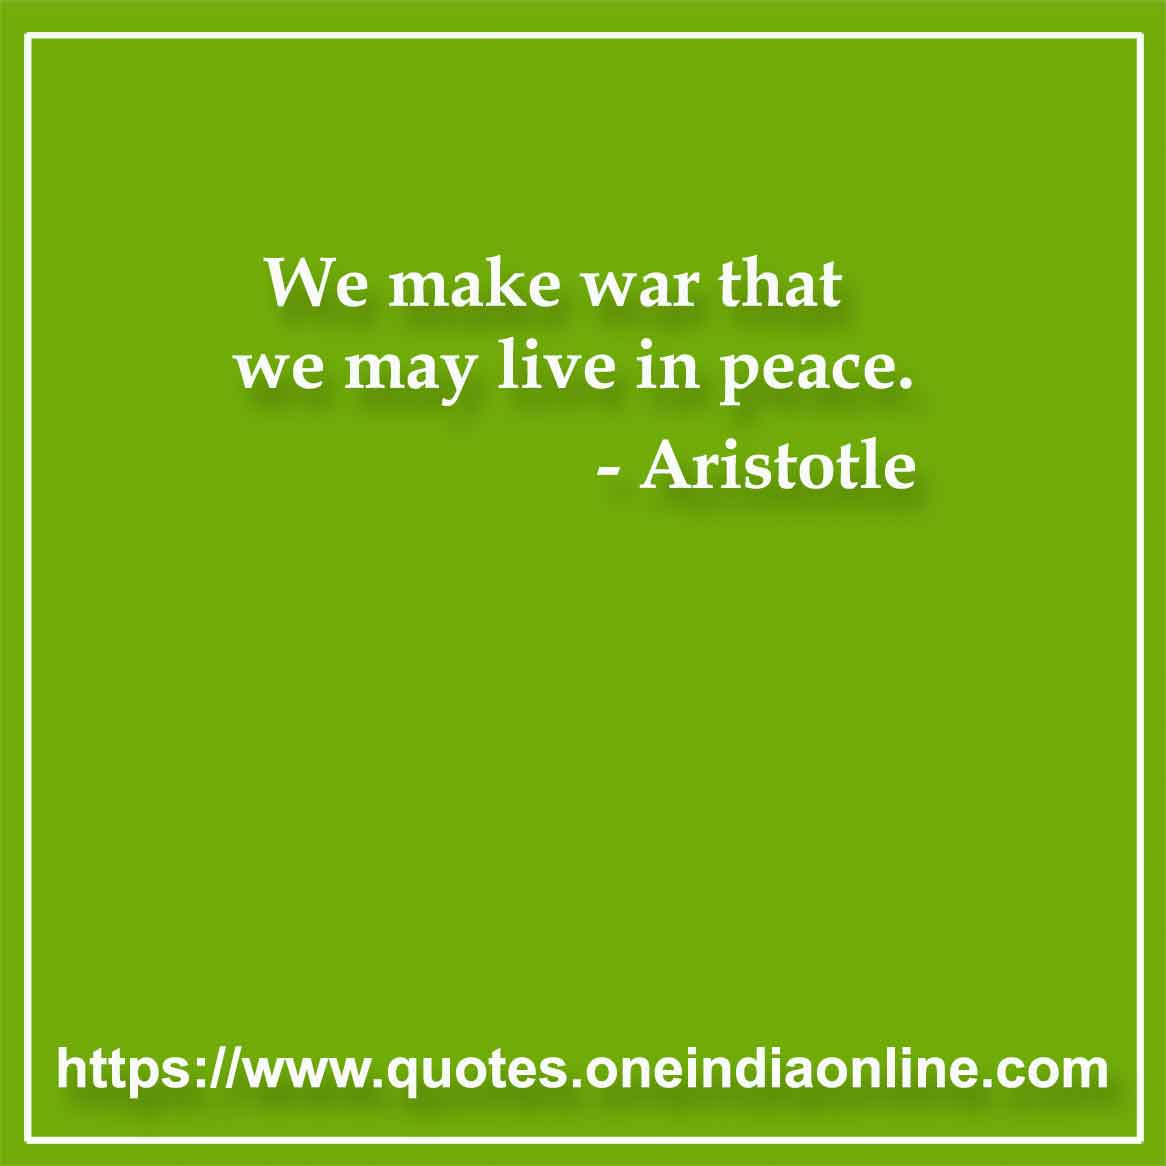 We make war that we may live in peace.

- Peace Quotes by Aristotle